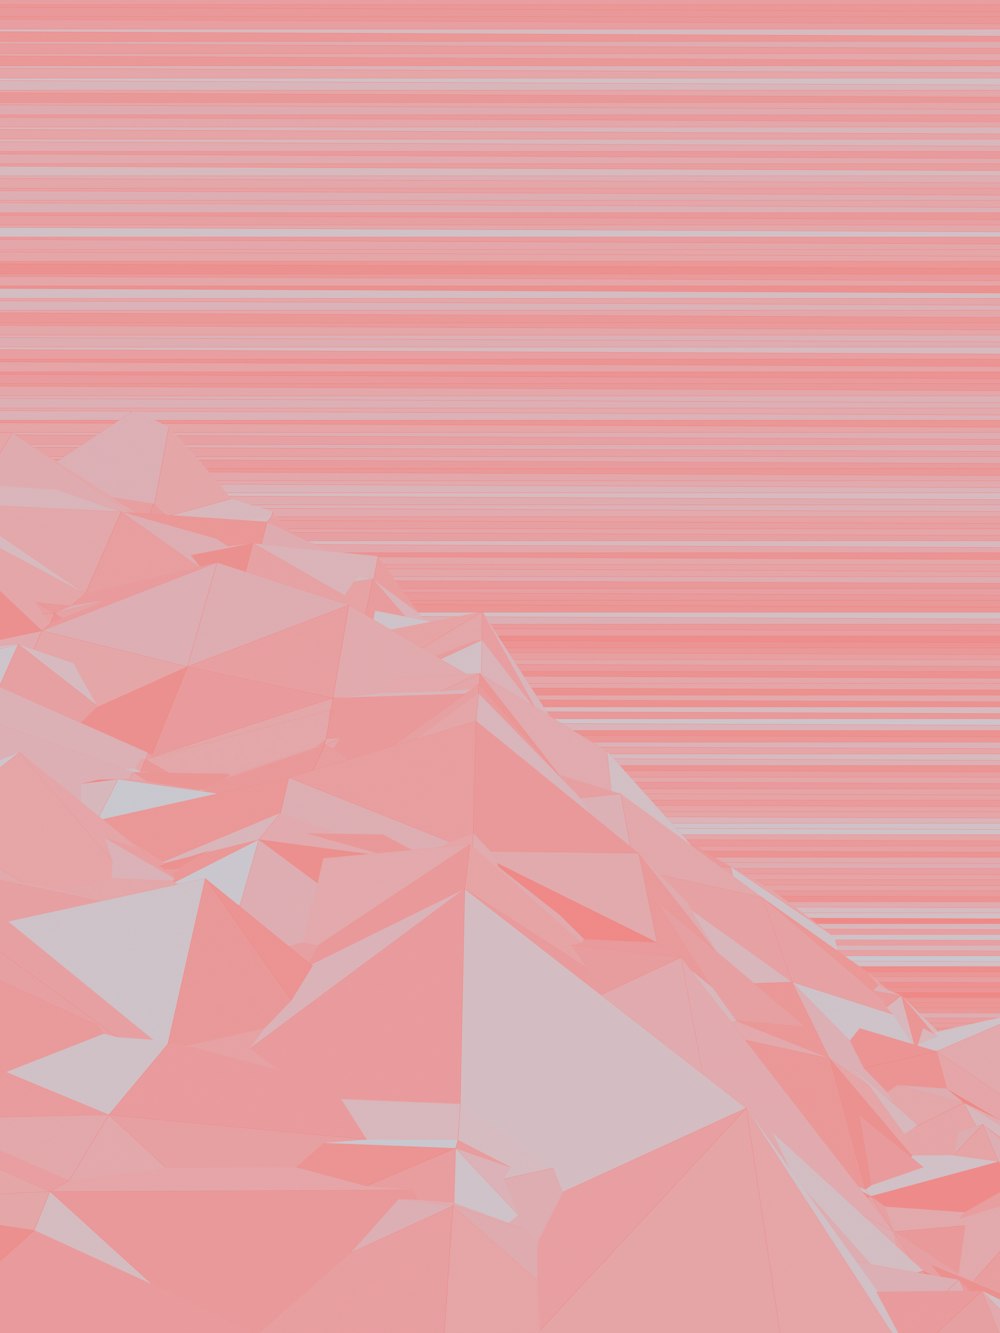 a pink abstract background with lines and shapes